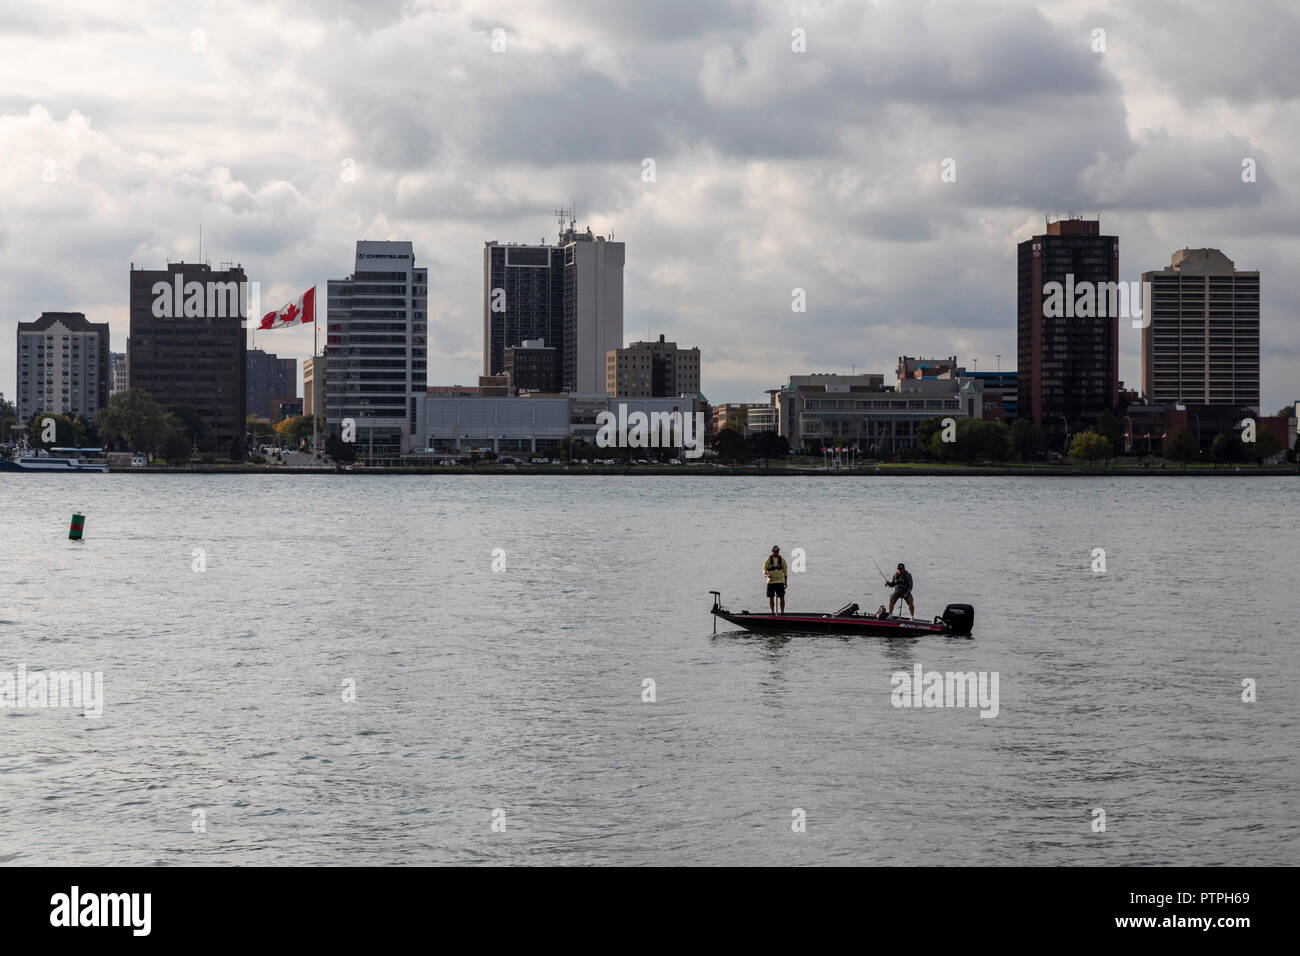 Detroit, Michigan - Two men fishing from a small boat on the Detroit River. Windsor, Ontario, Canada is on the far side. Stock Photo